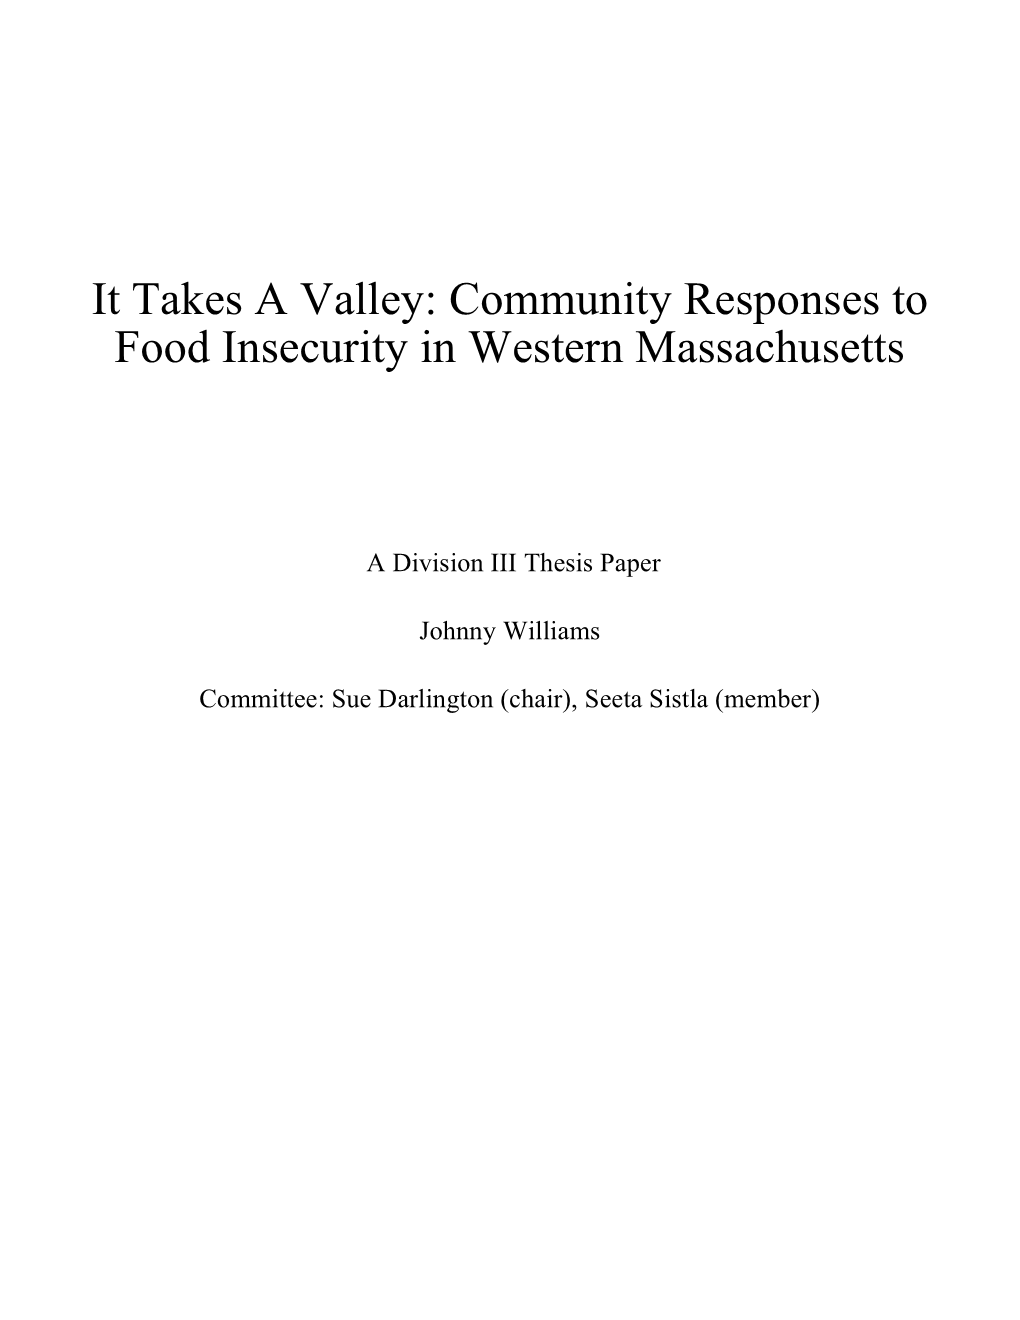 Community Responses to Food Insecurity in Western Massachusetts